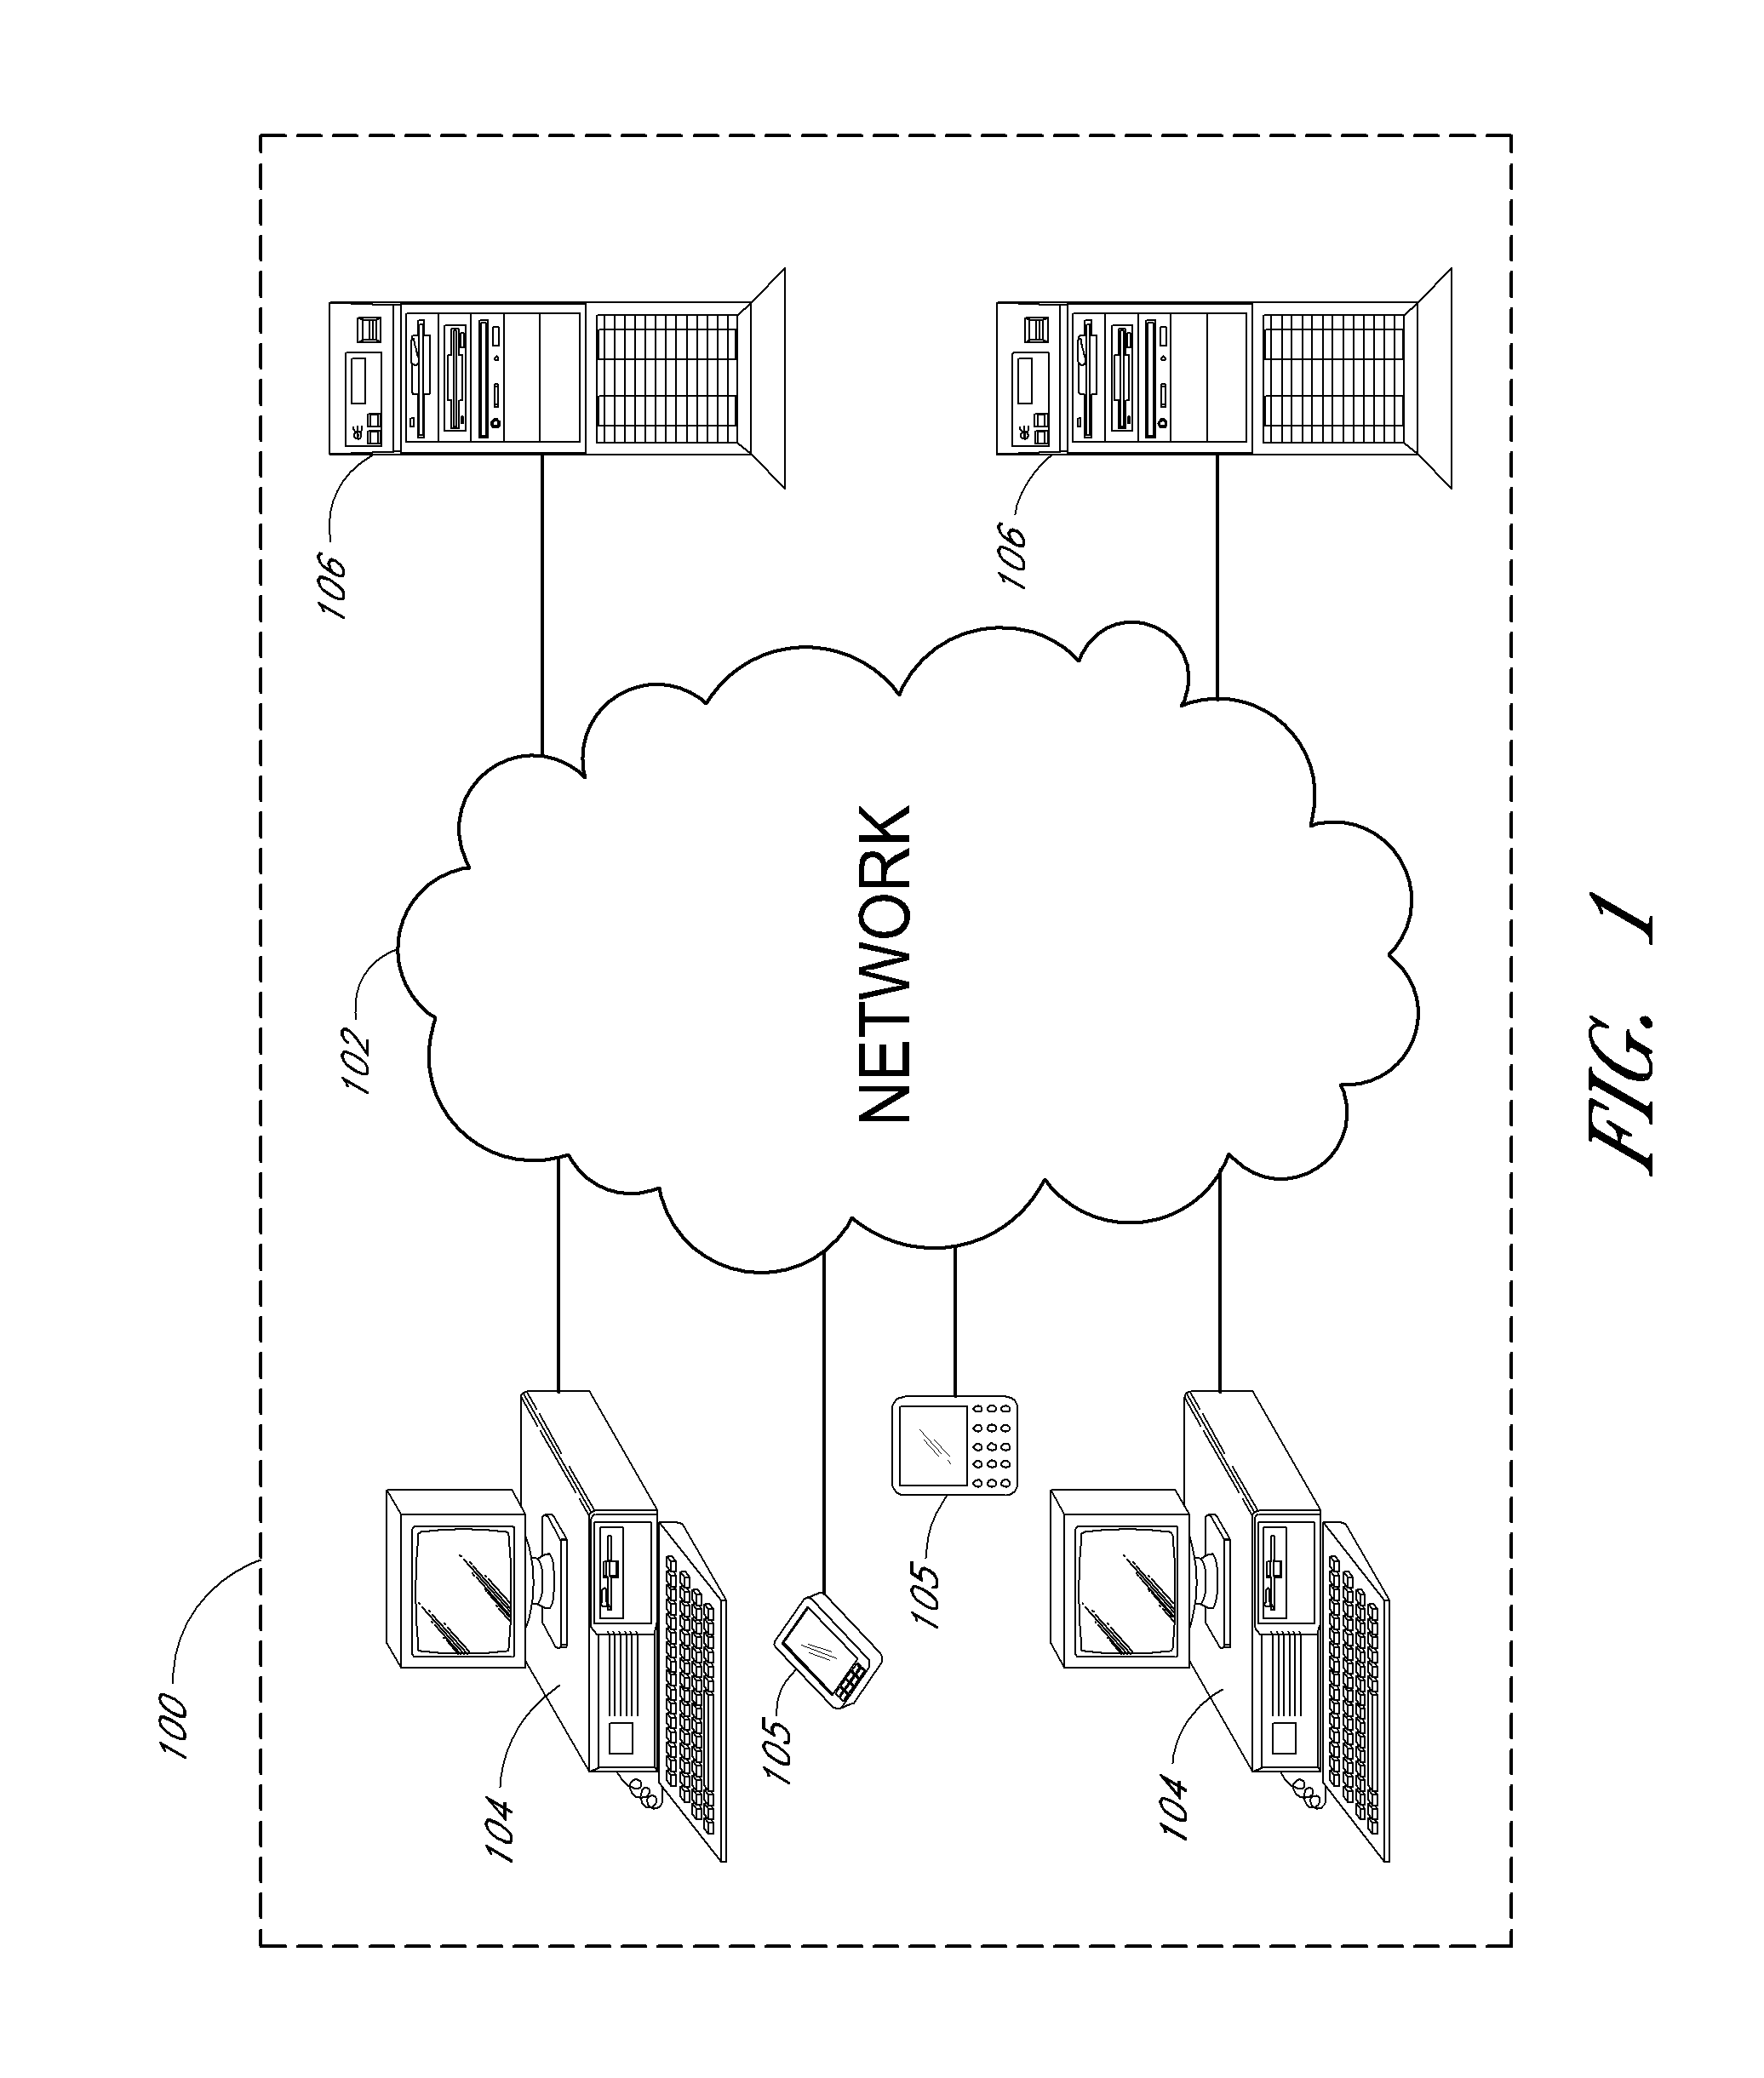 System and method for optimizing use of plug-in air conditioners and portable heaters